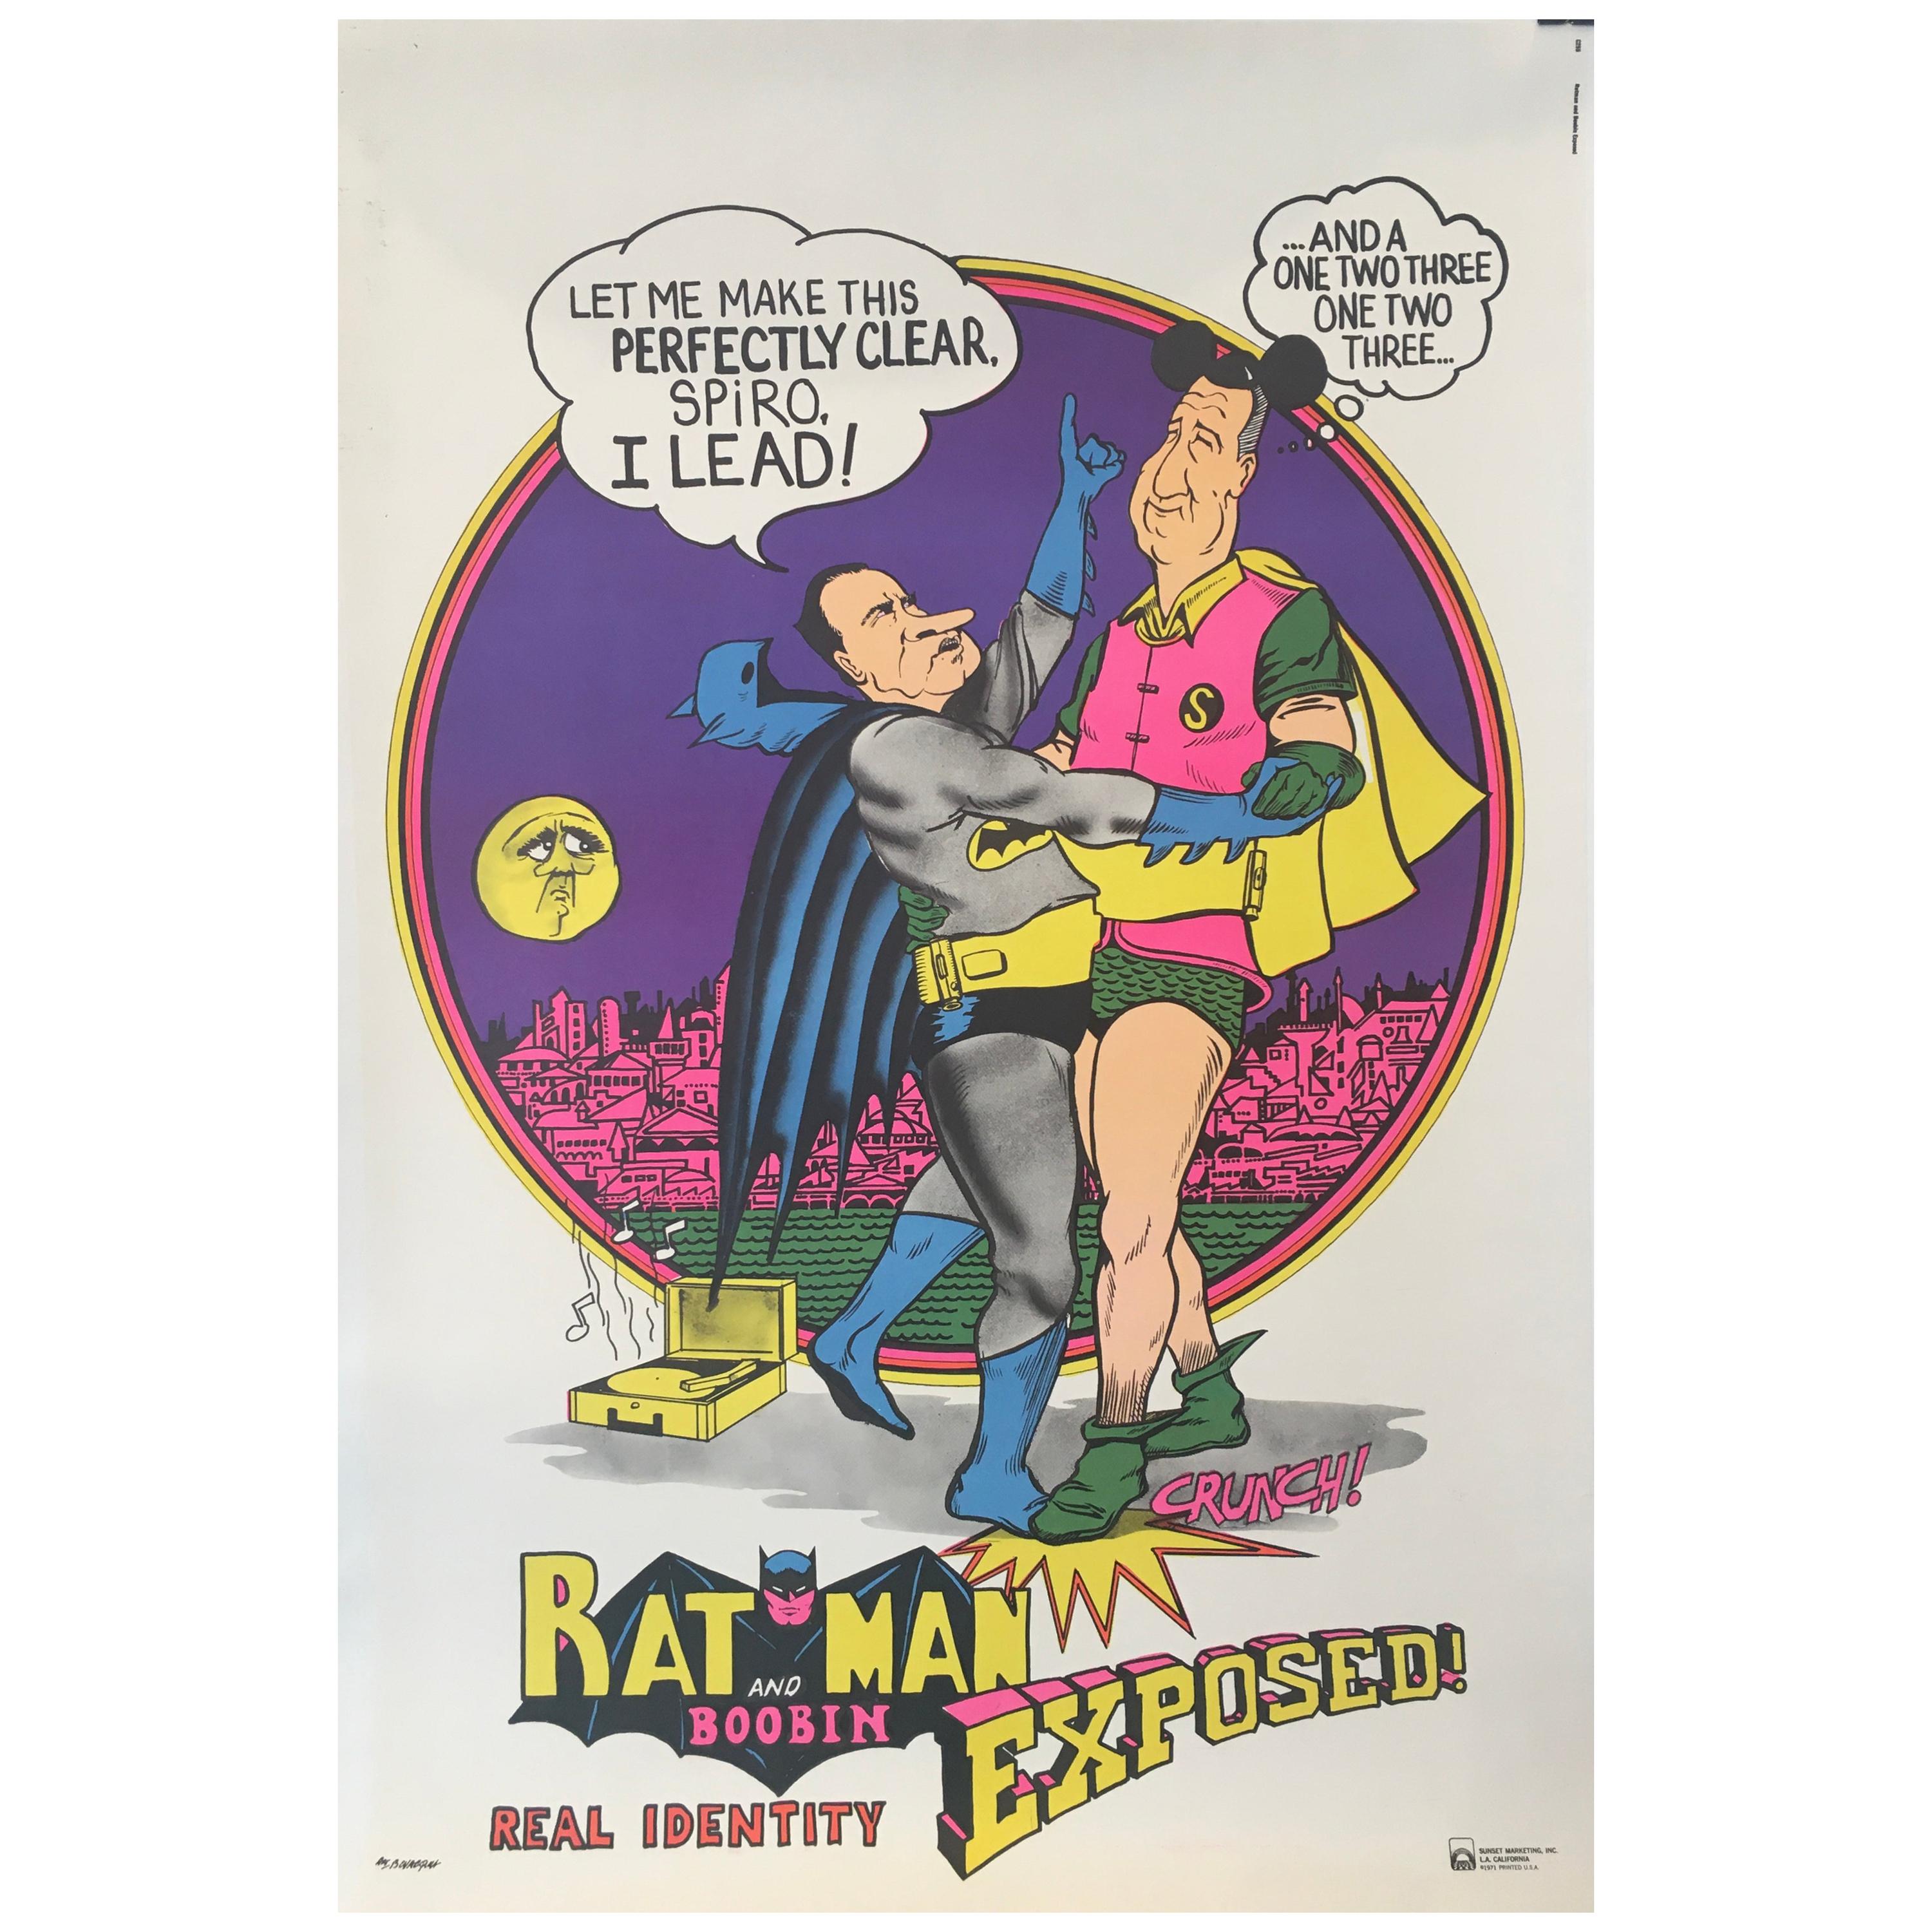 'Ratman and Boobin Real Identity Exposed' Original Vintage American Poster, 1970